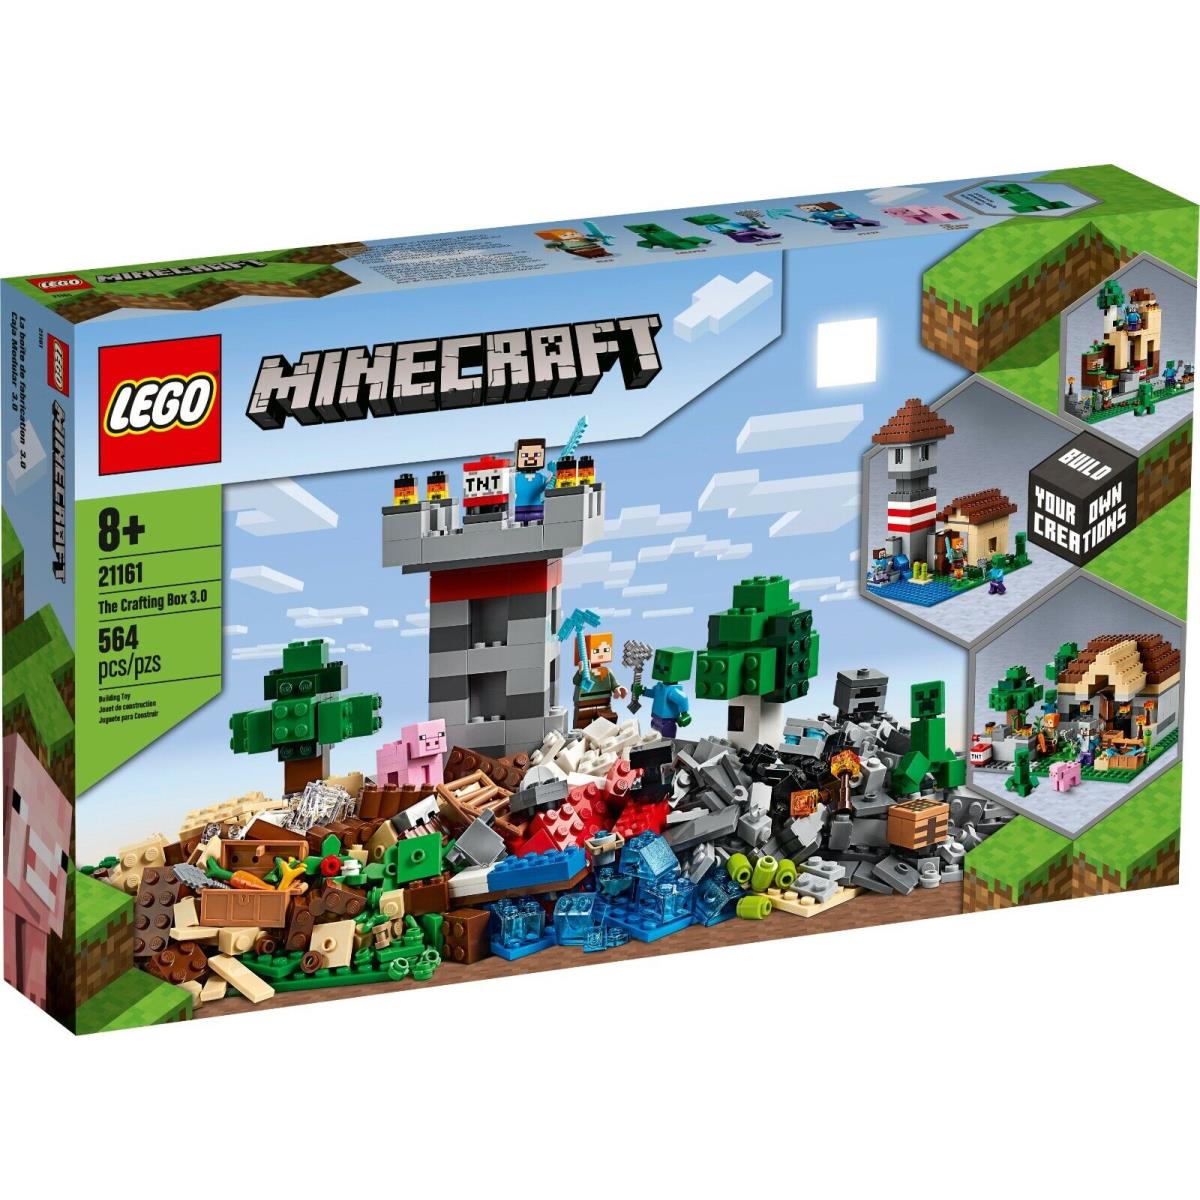 Lego Minecraft 21161 The Crafting Box 3.0 Building Set 562 Pieces